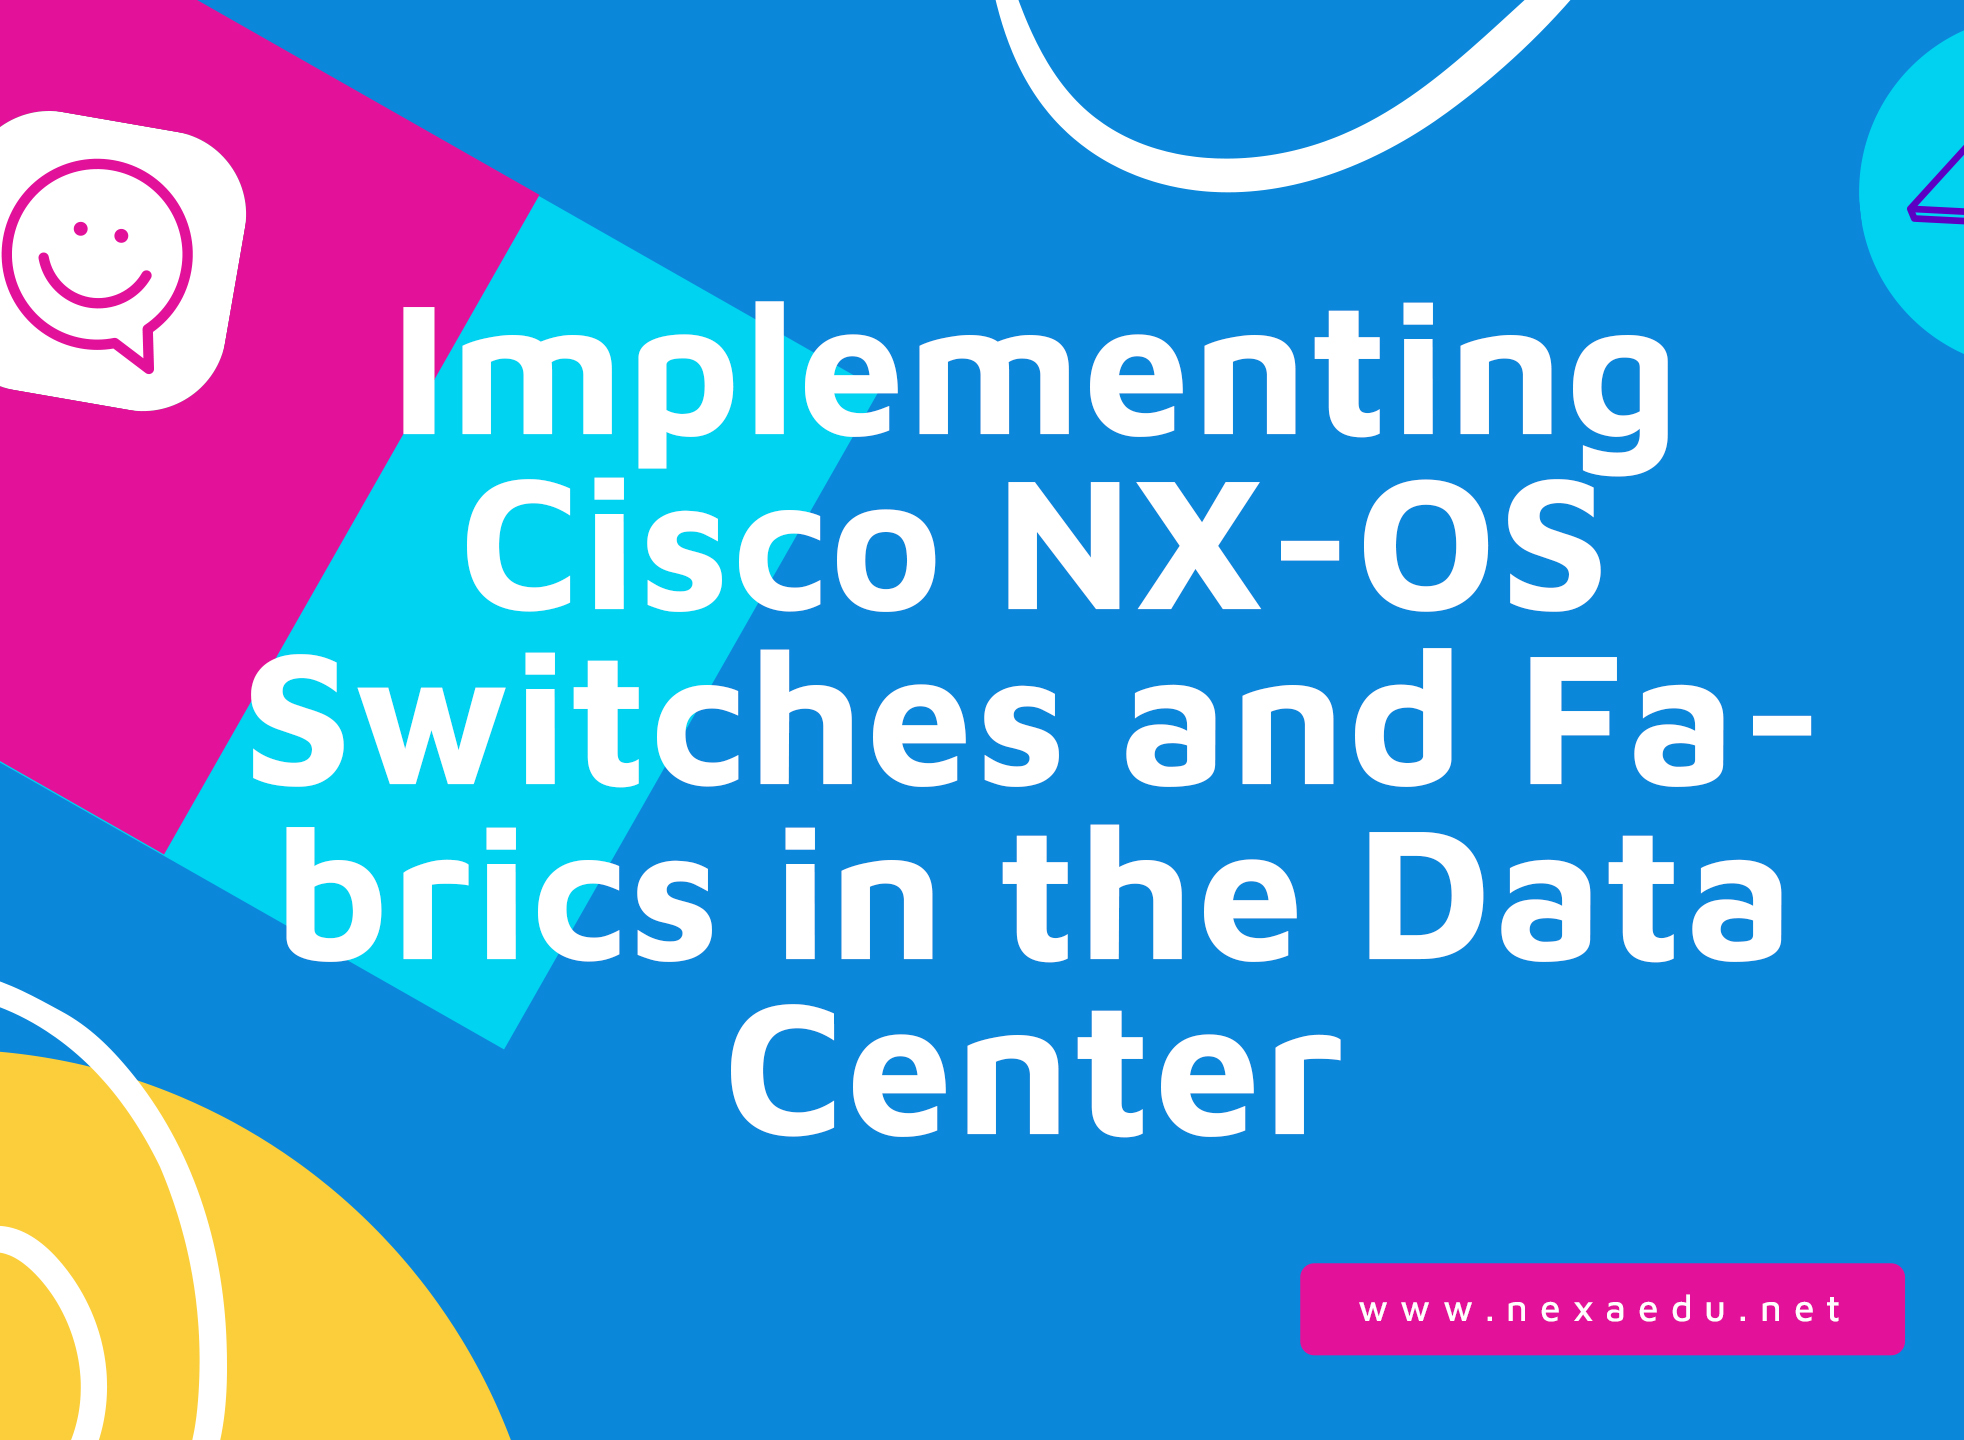 Implementing Cisco NX-OS Switches and Fabrics in the Data Center